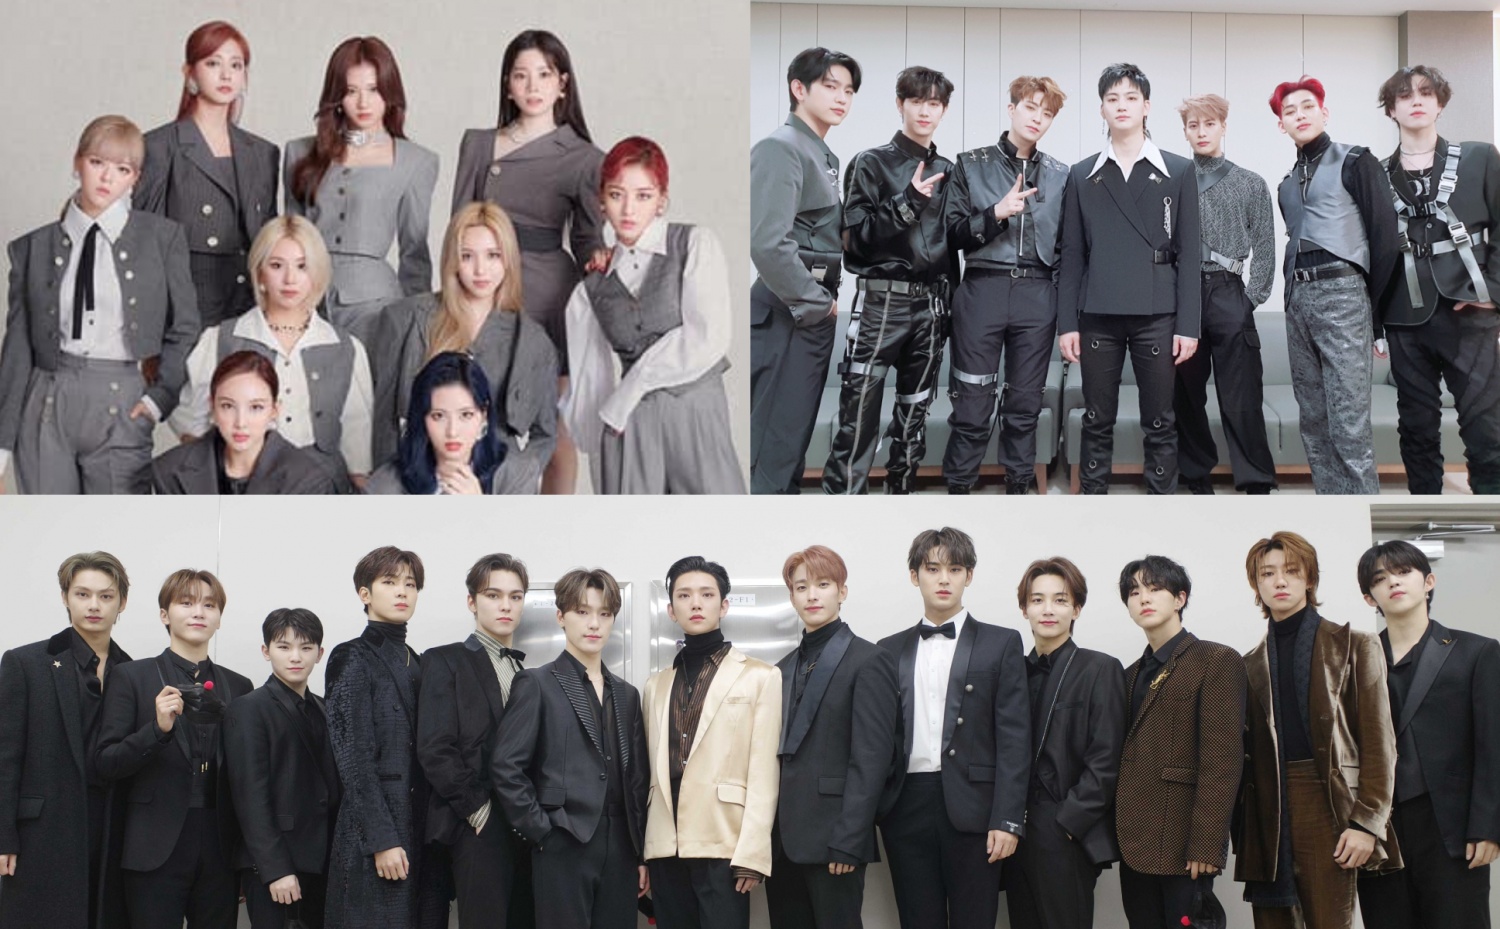 Twice Got7 Seventeen And More Confirmed To Attend 35th Golden Disc Awards Kpoplover